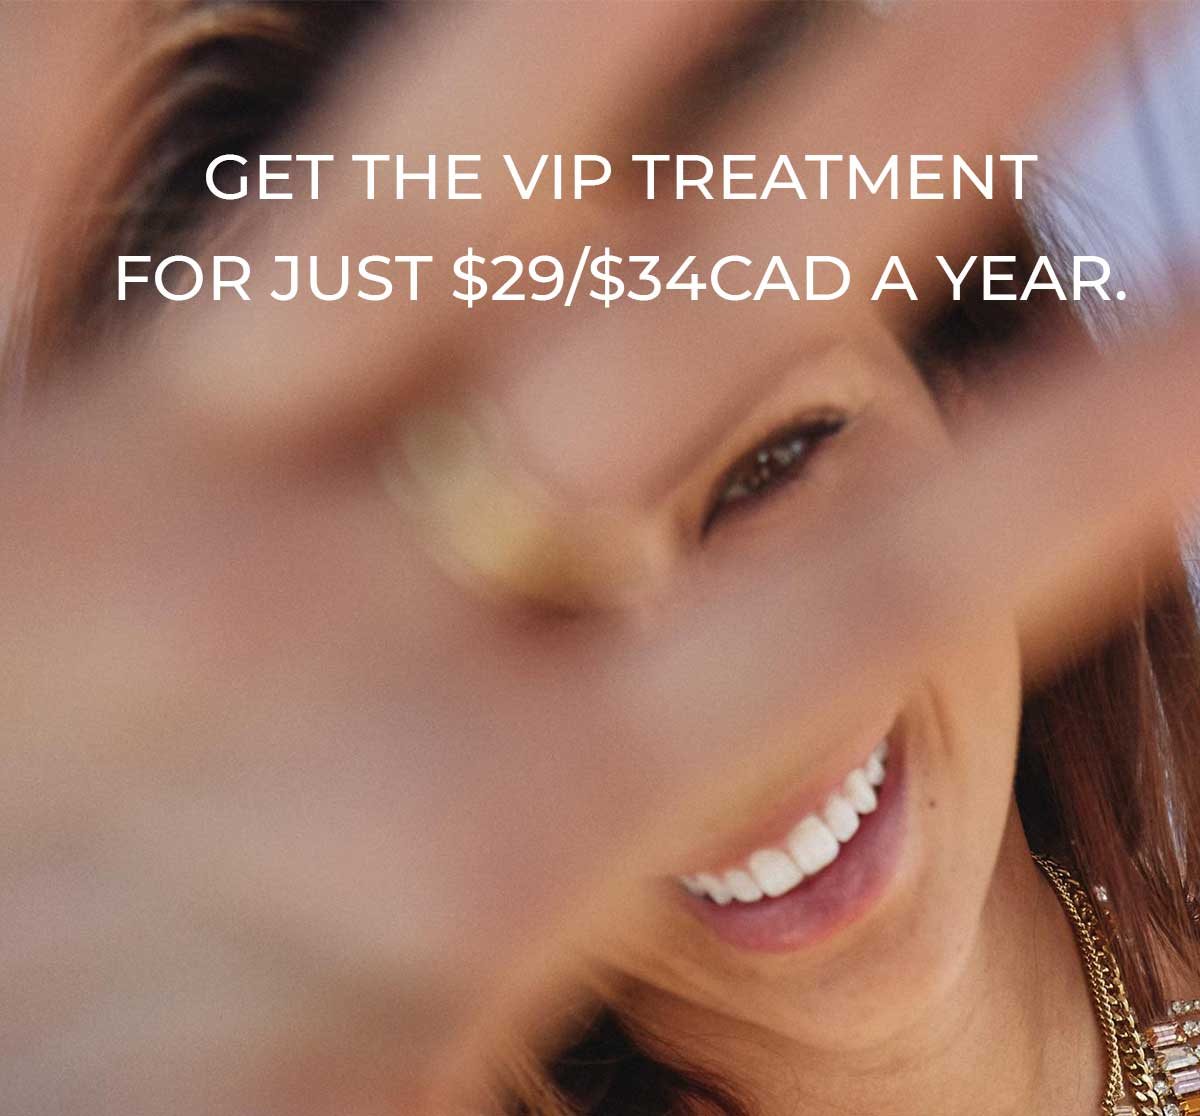 Get the VIP Treatment for Just $29/$34CAD a Year.